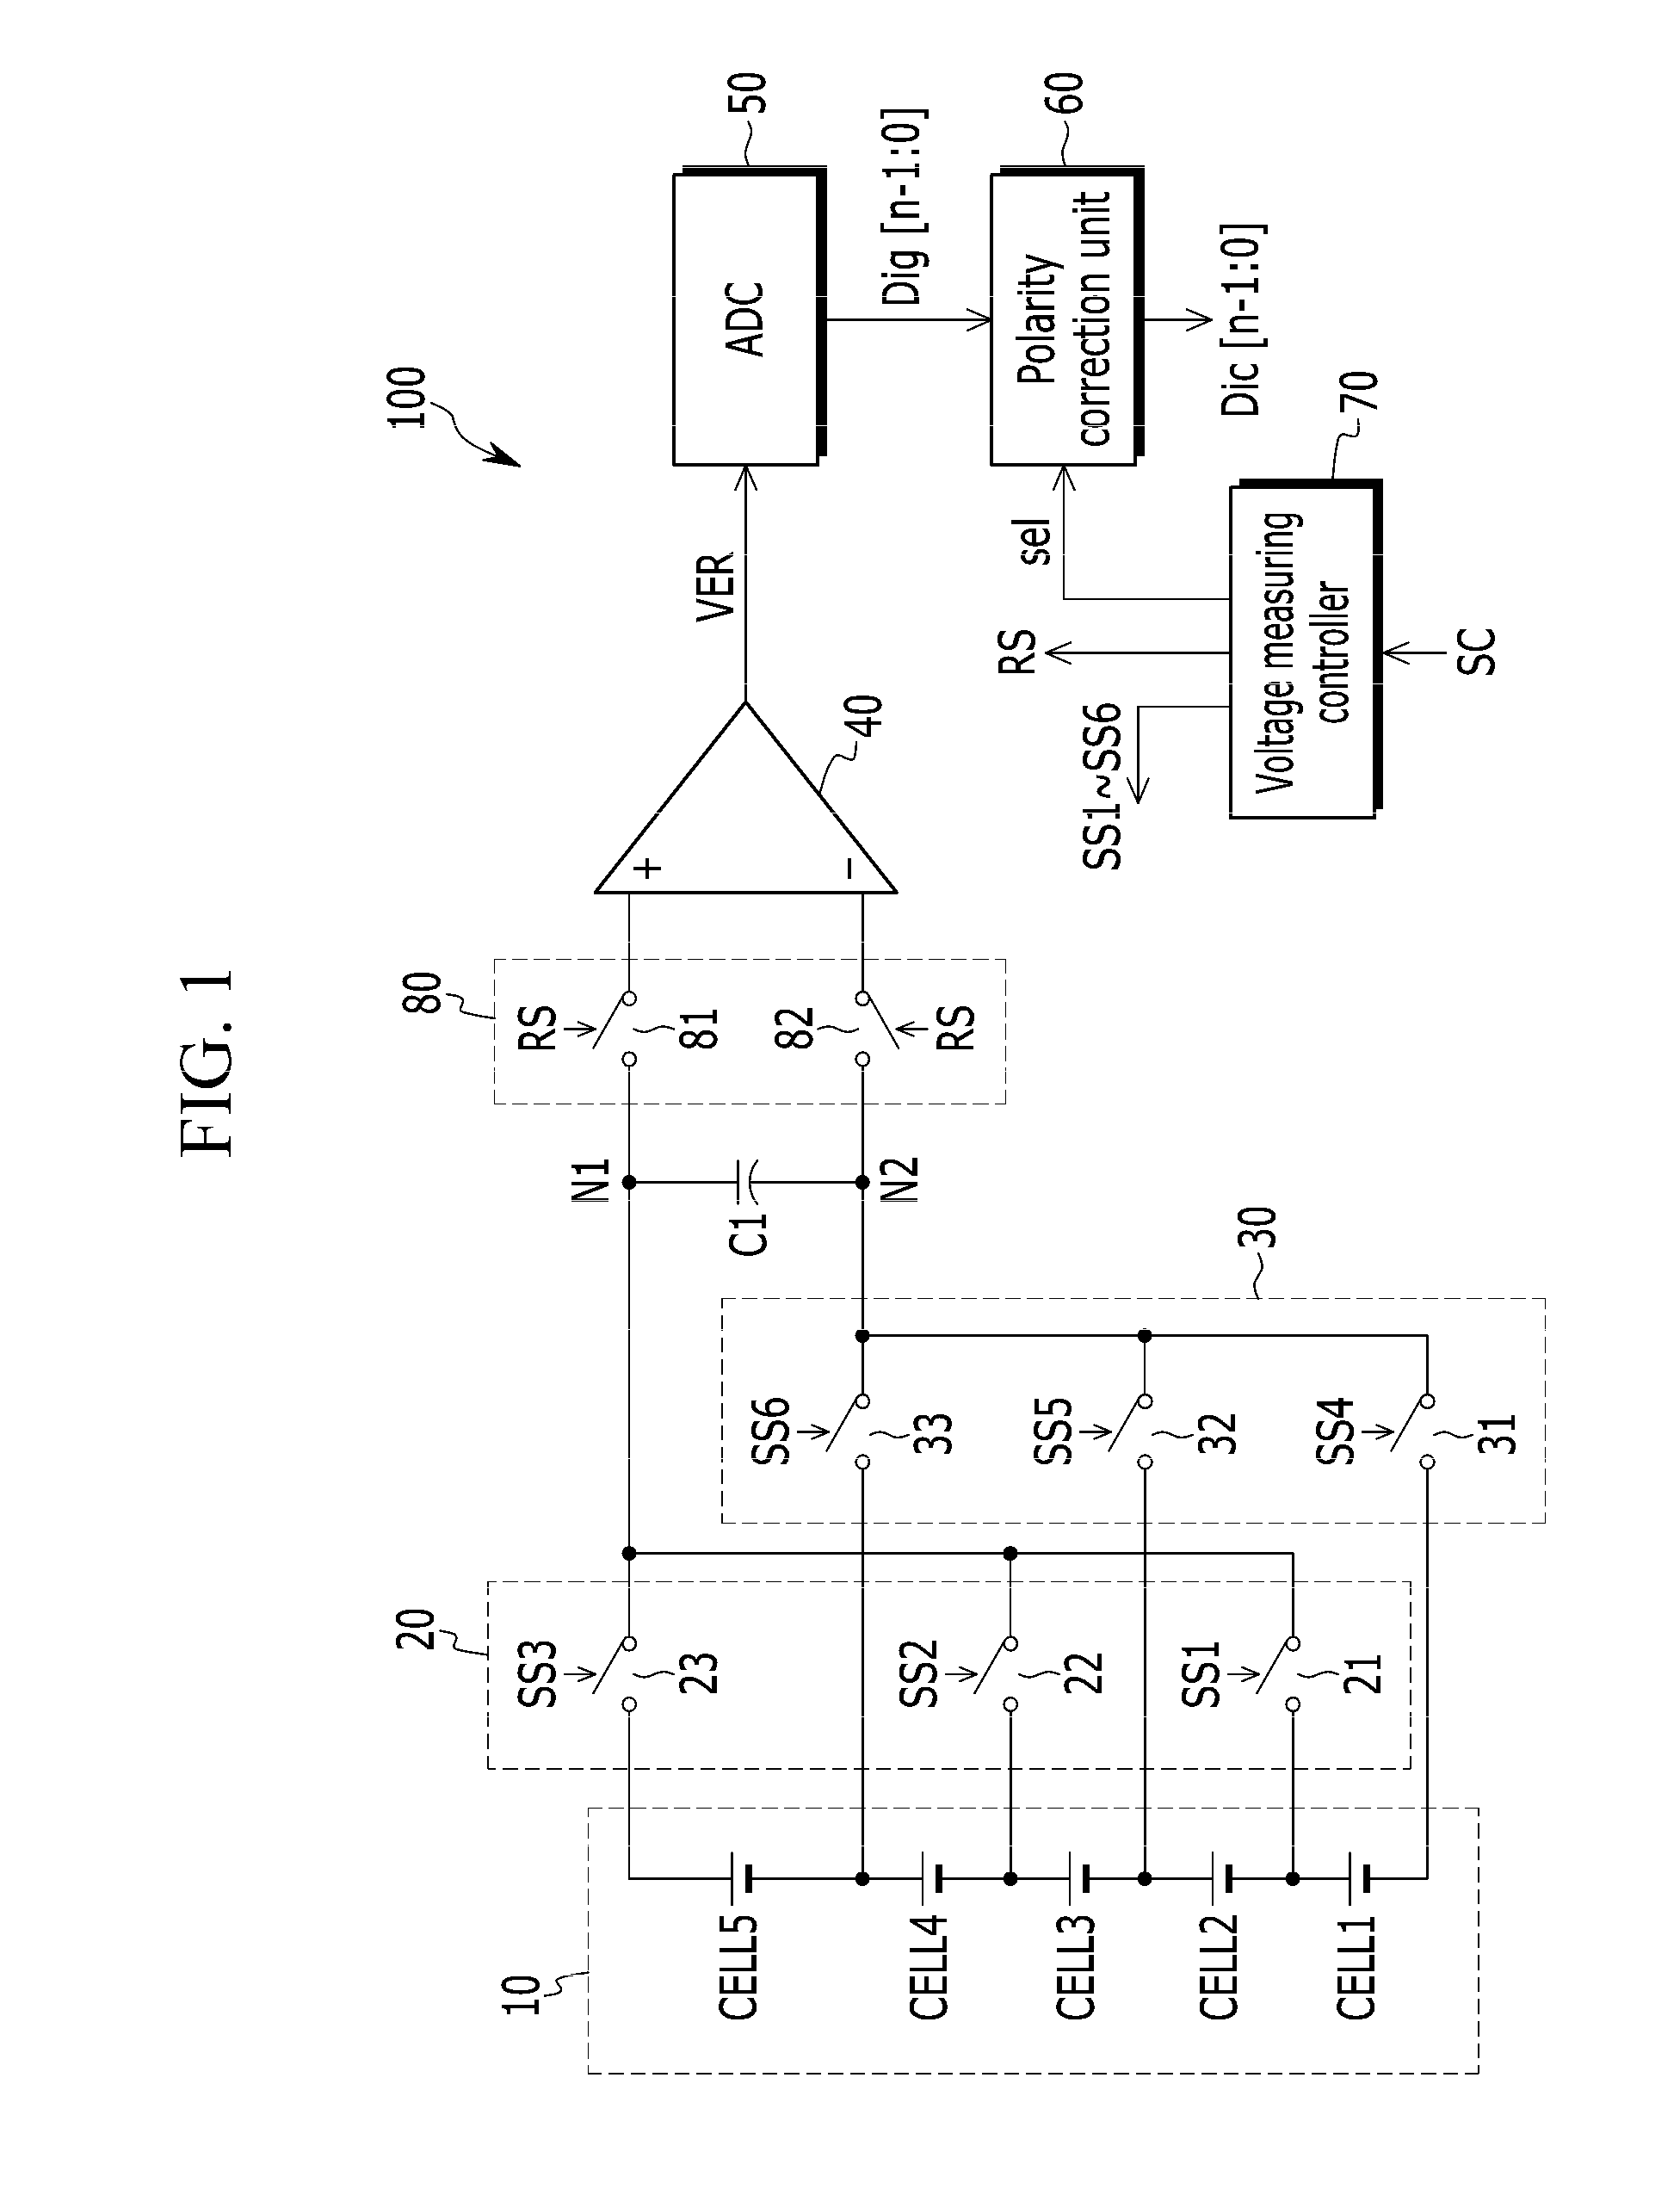 Voltage measuring apparatus and battery management system including the same